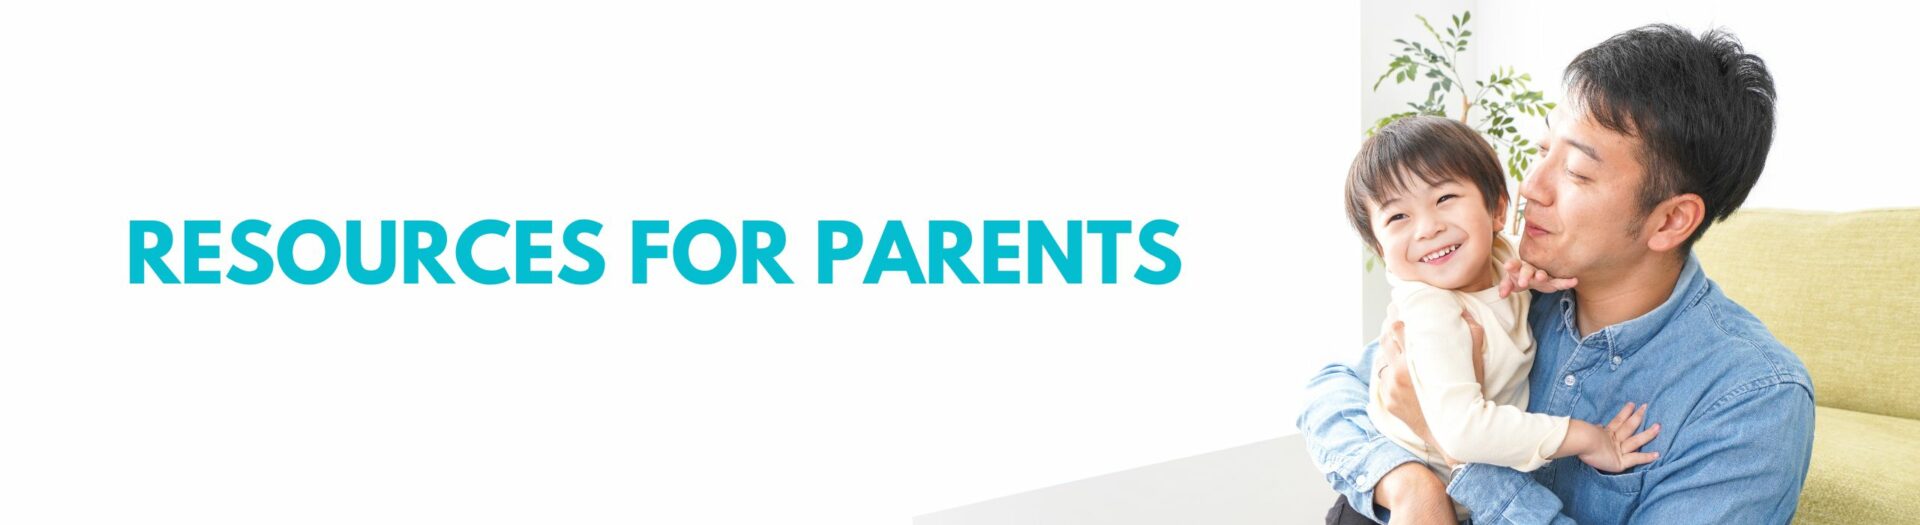 resources for parents 1